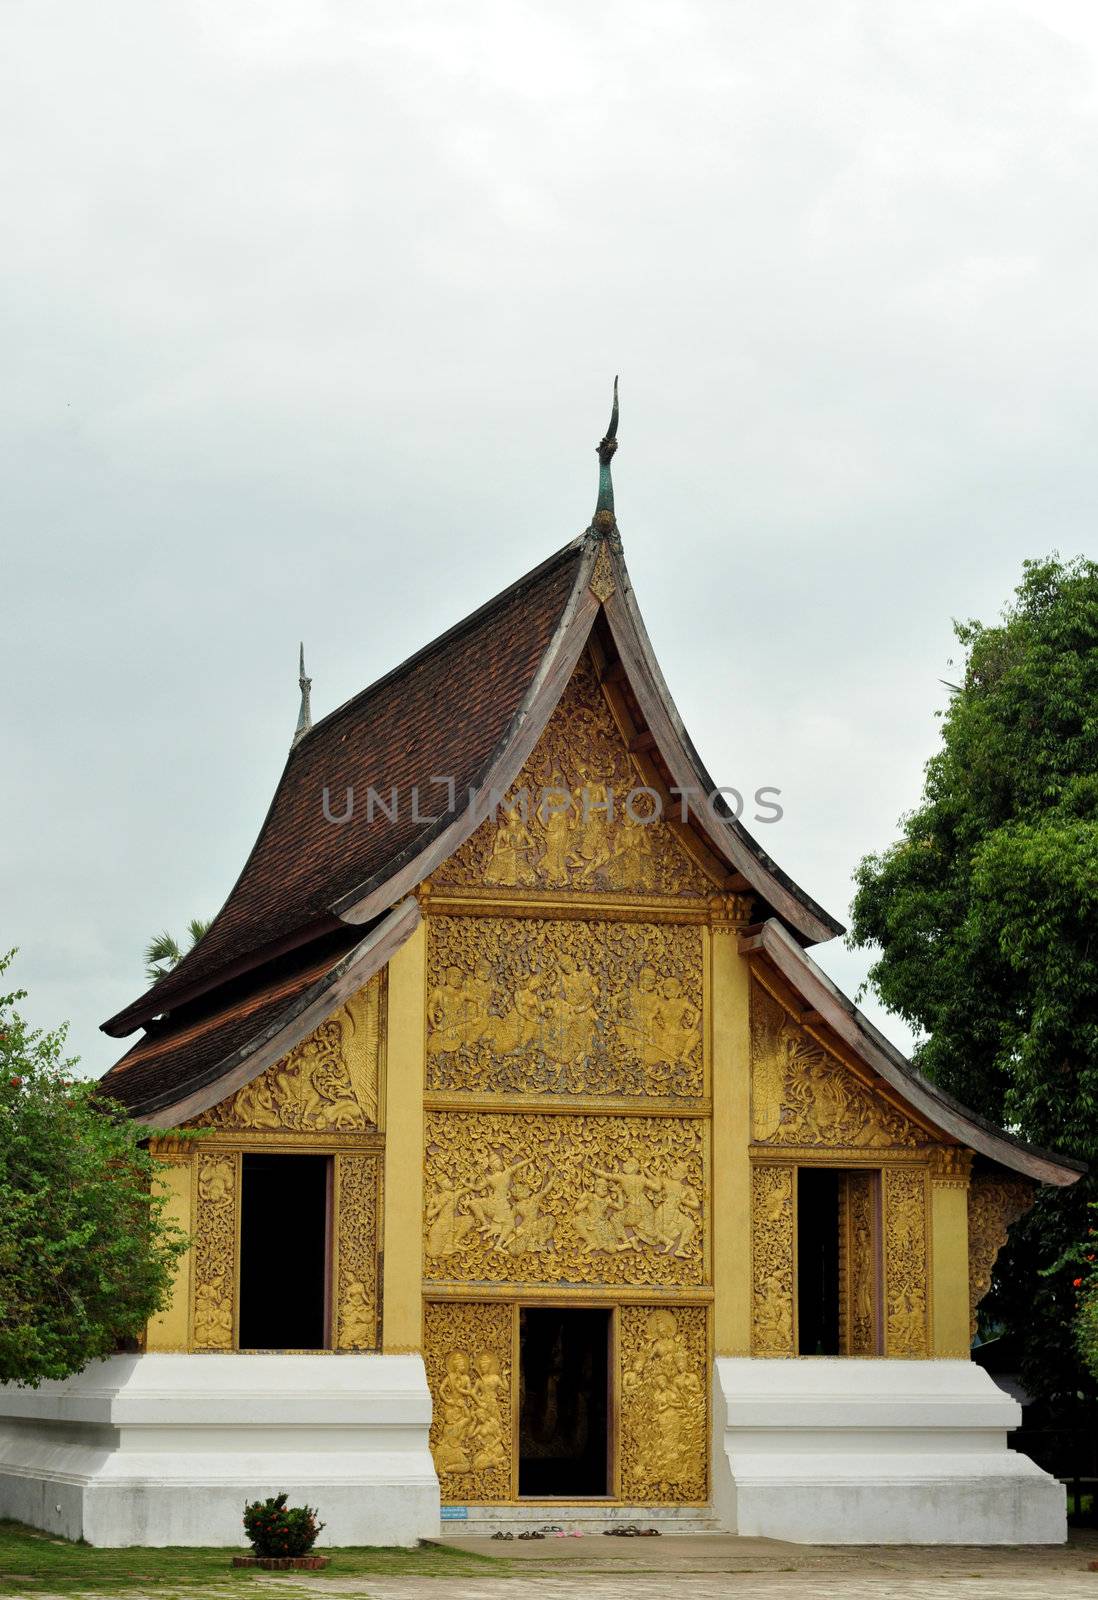 Old,beautiful buddhist temple in Luang Prabang,Laos. by taboga